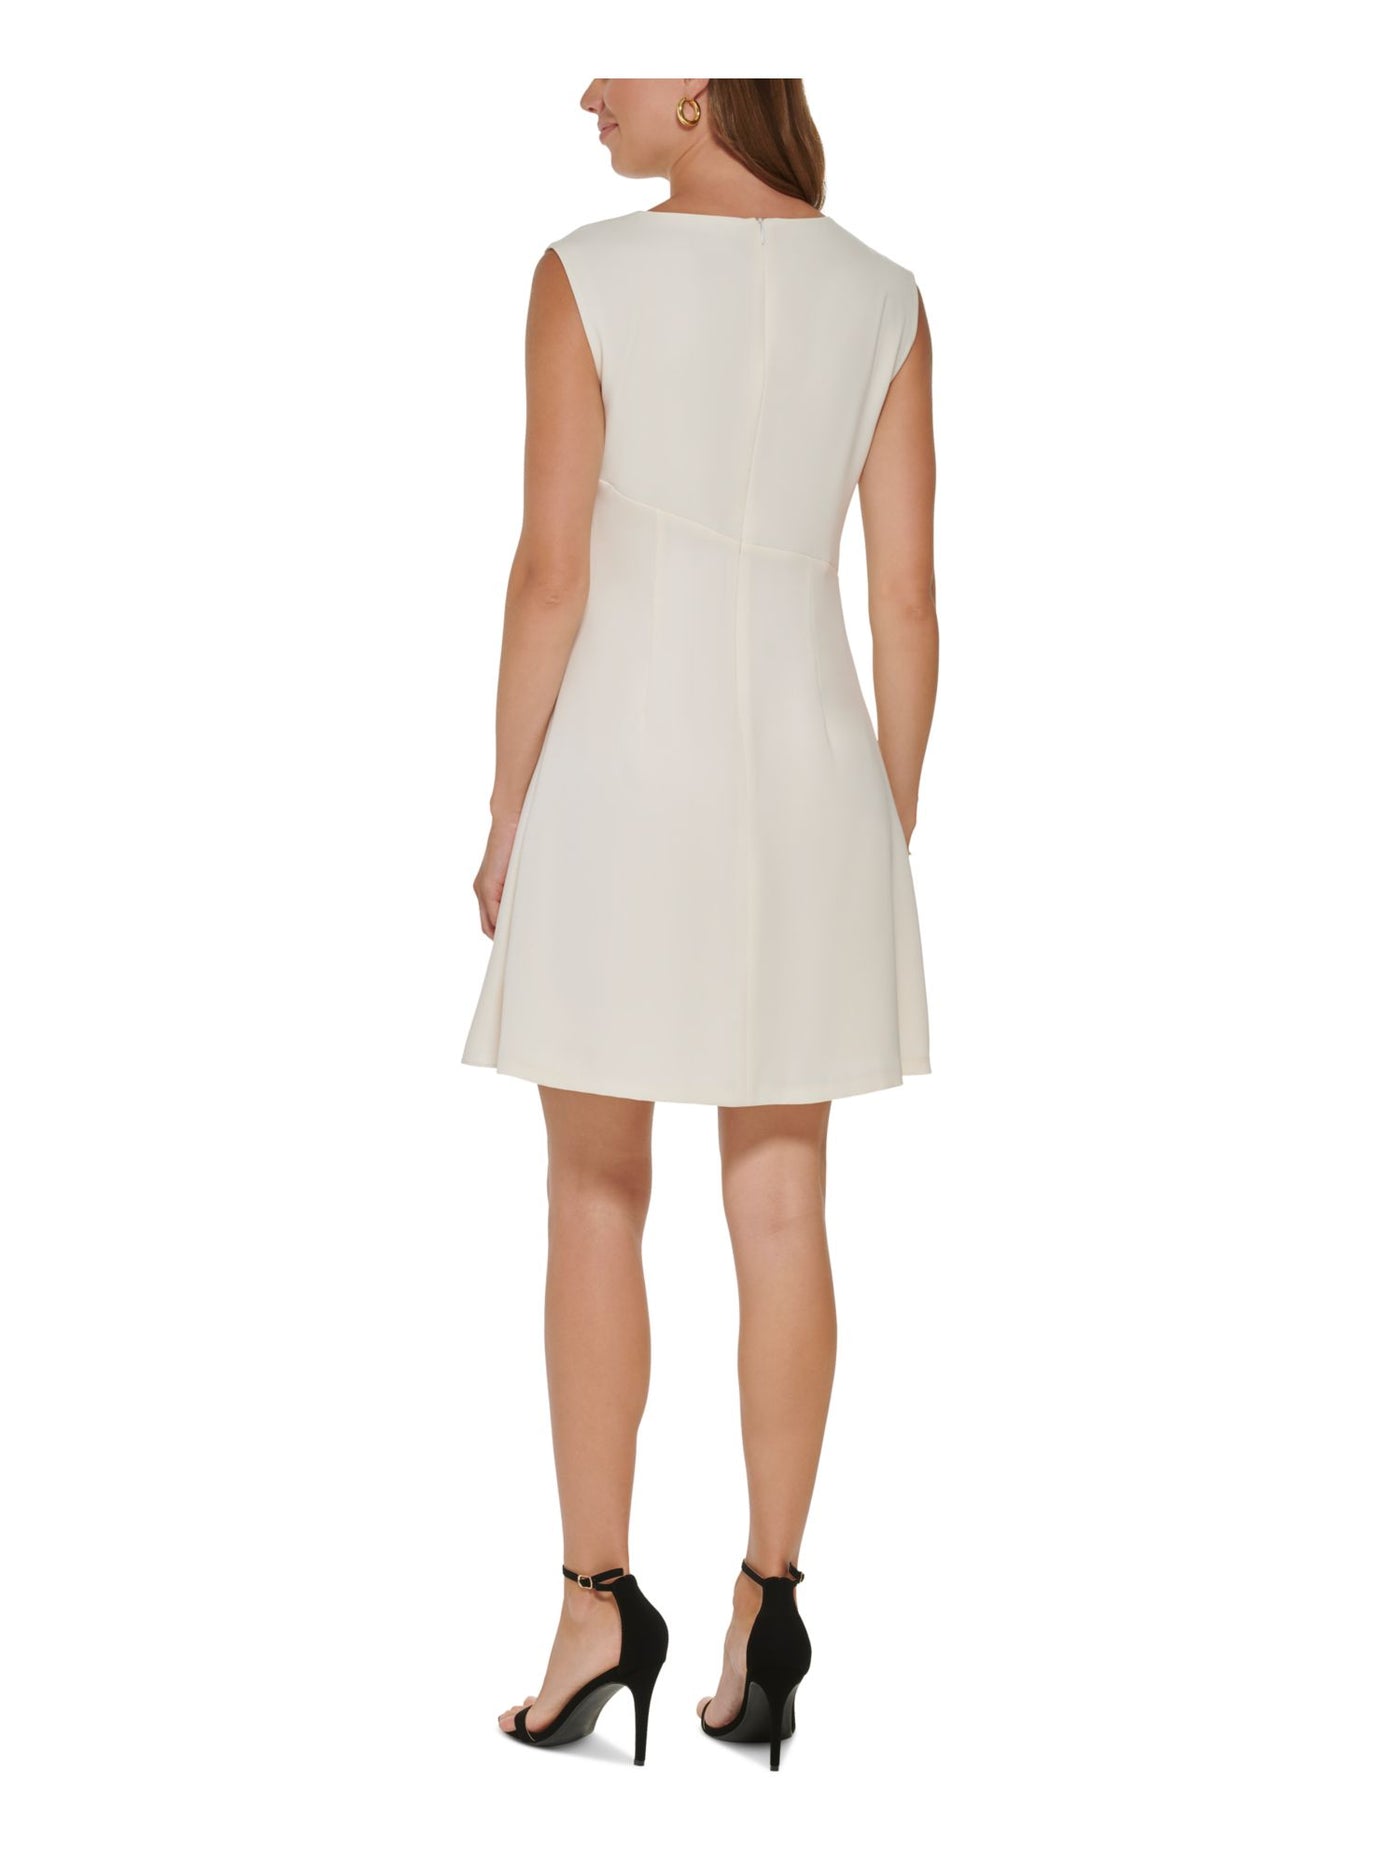 DKNY Womens Ivory Pleated Zippered Lined Ruffled Sleeveless Asymmetrical Neckline Above The Knee Party Fit + Flare Dress 14